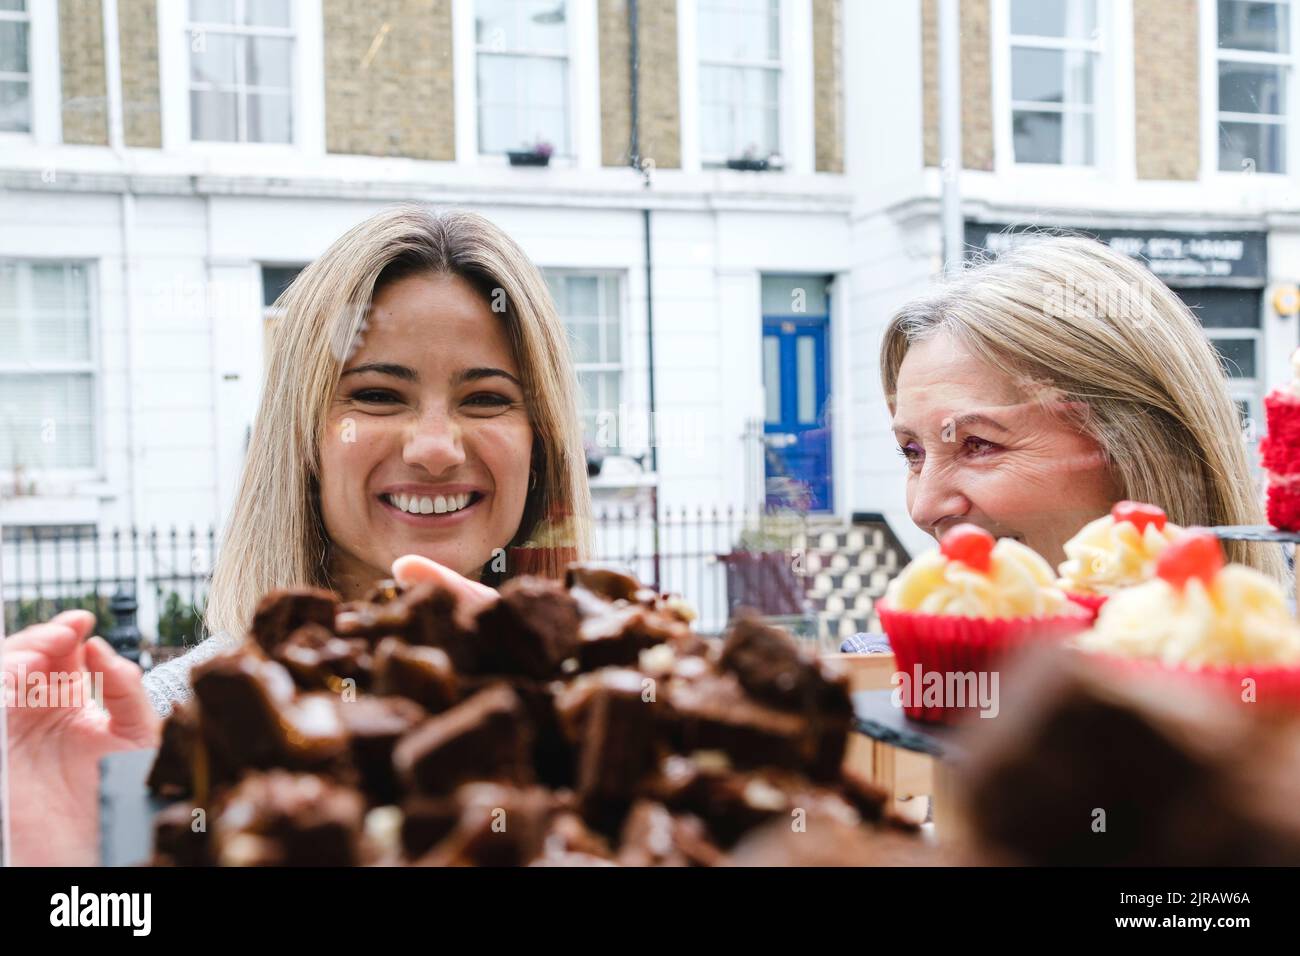 Smiling woman looking at sweet food from window by mother Stock Photo